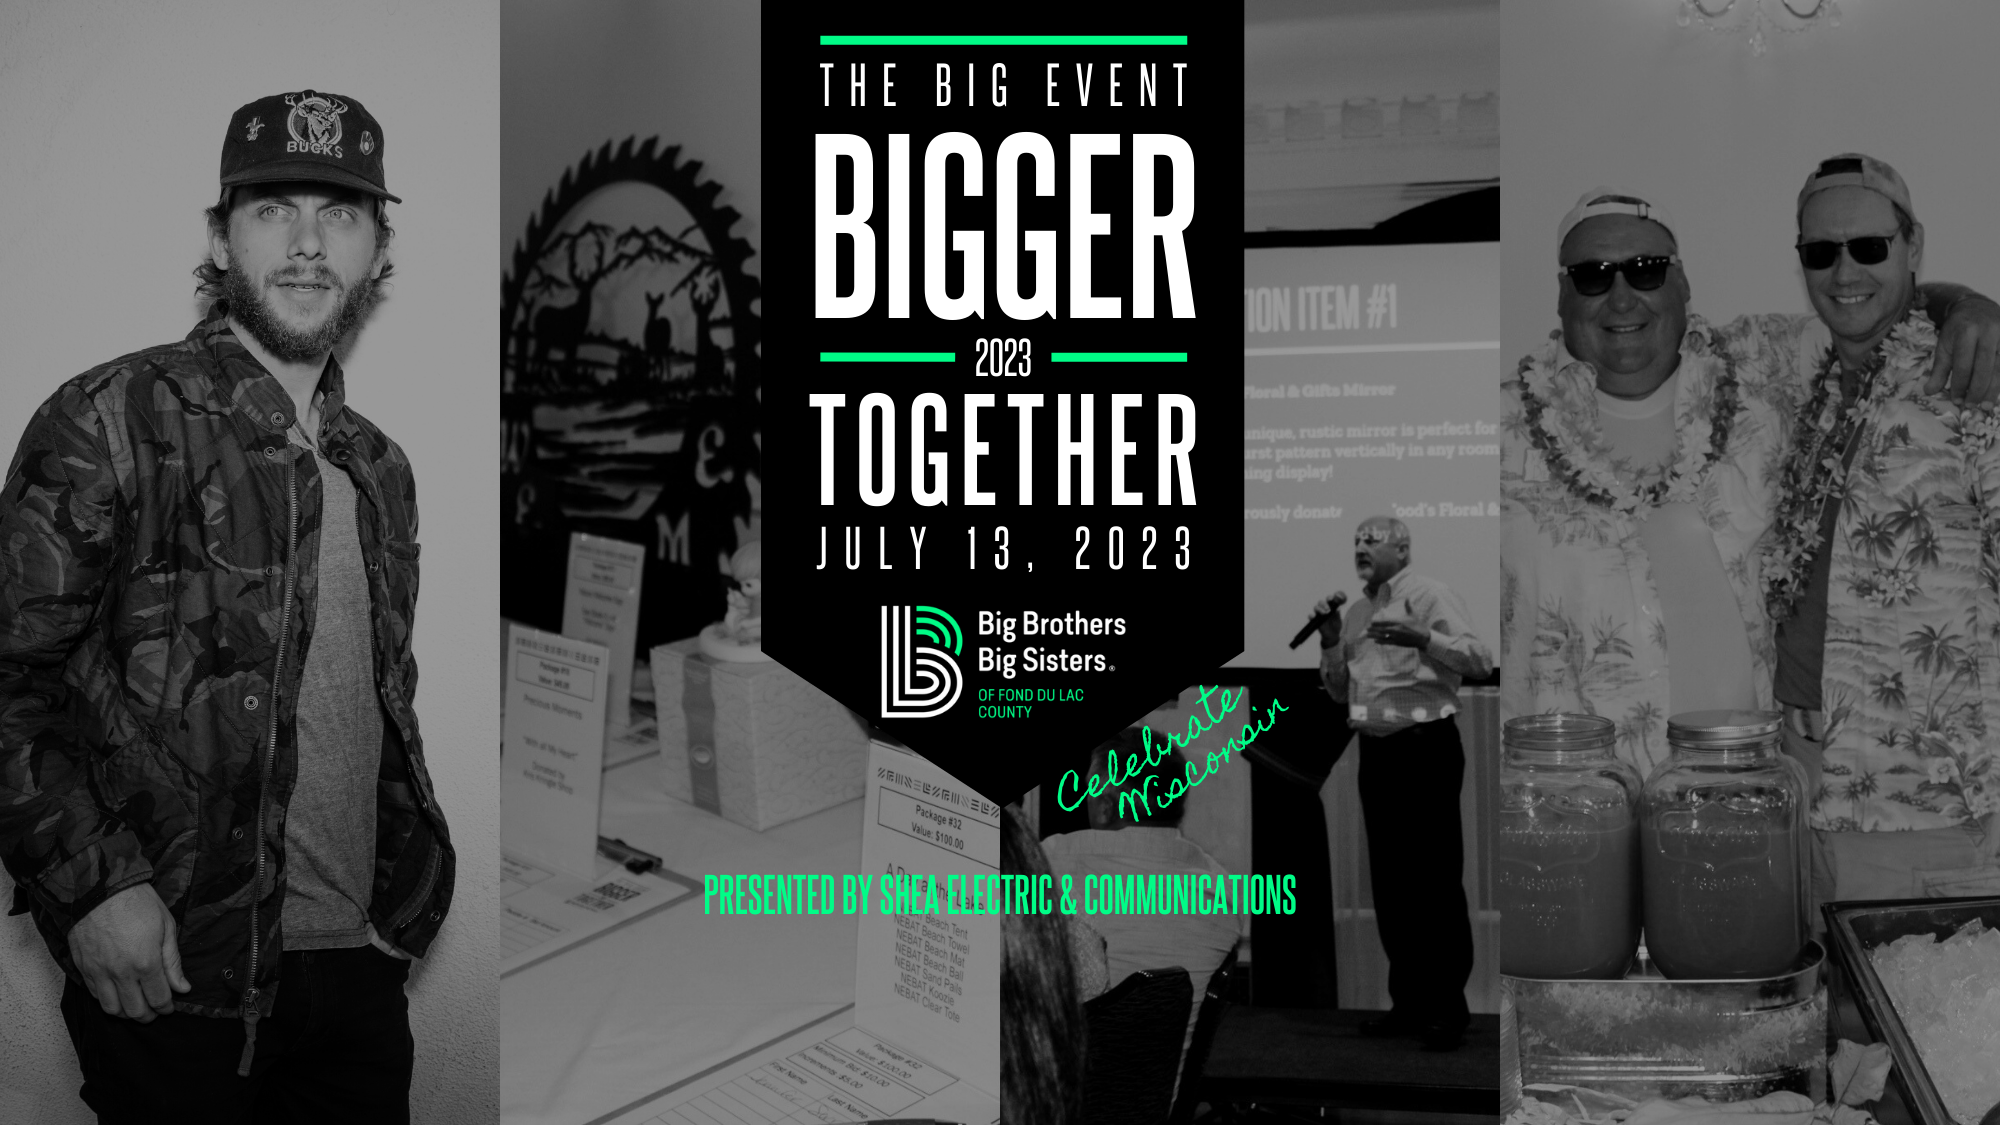 Events from June 23 July 17, 2022 Big Brothers Big Sisters of Fond